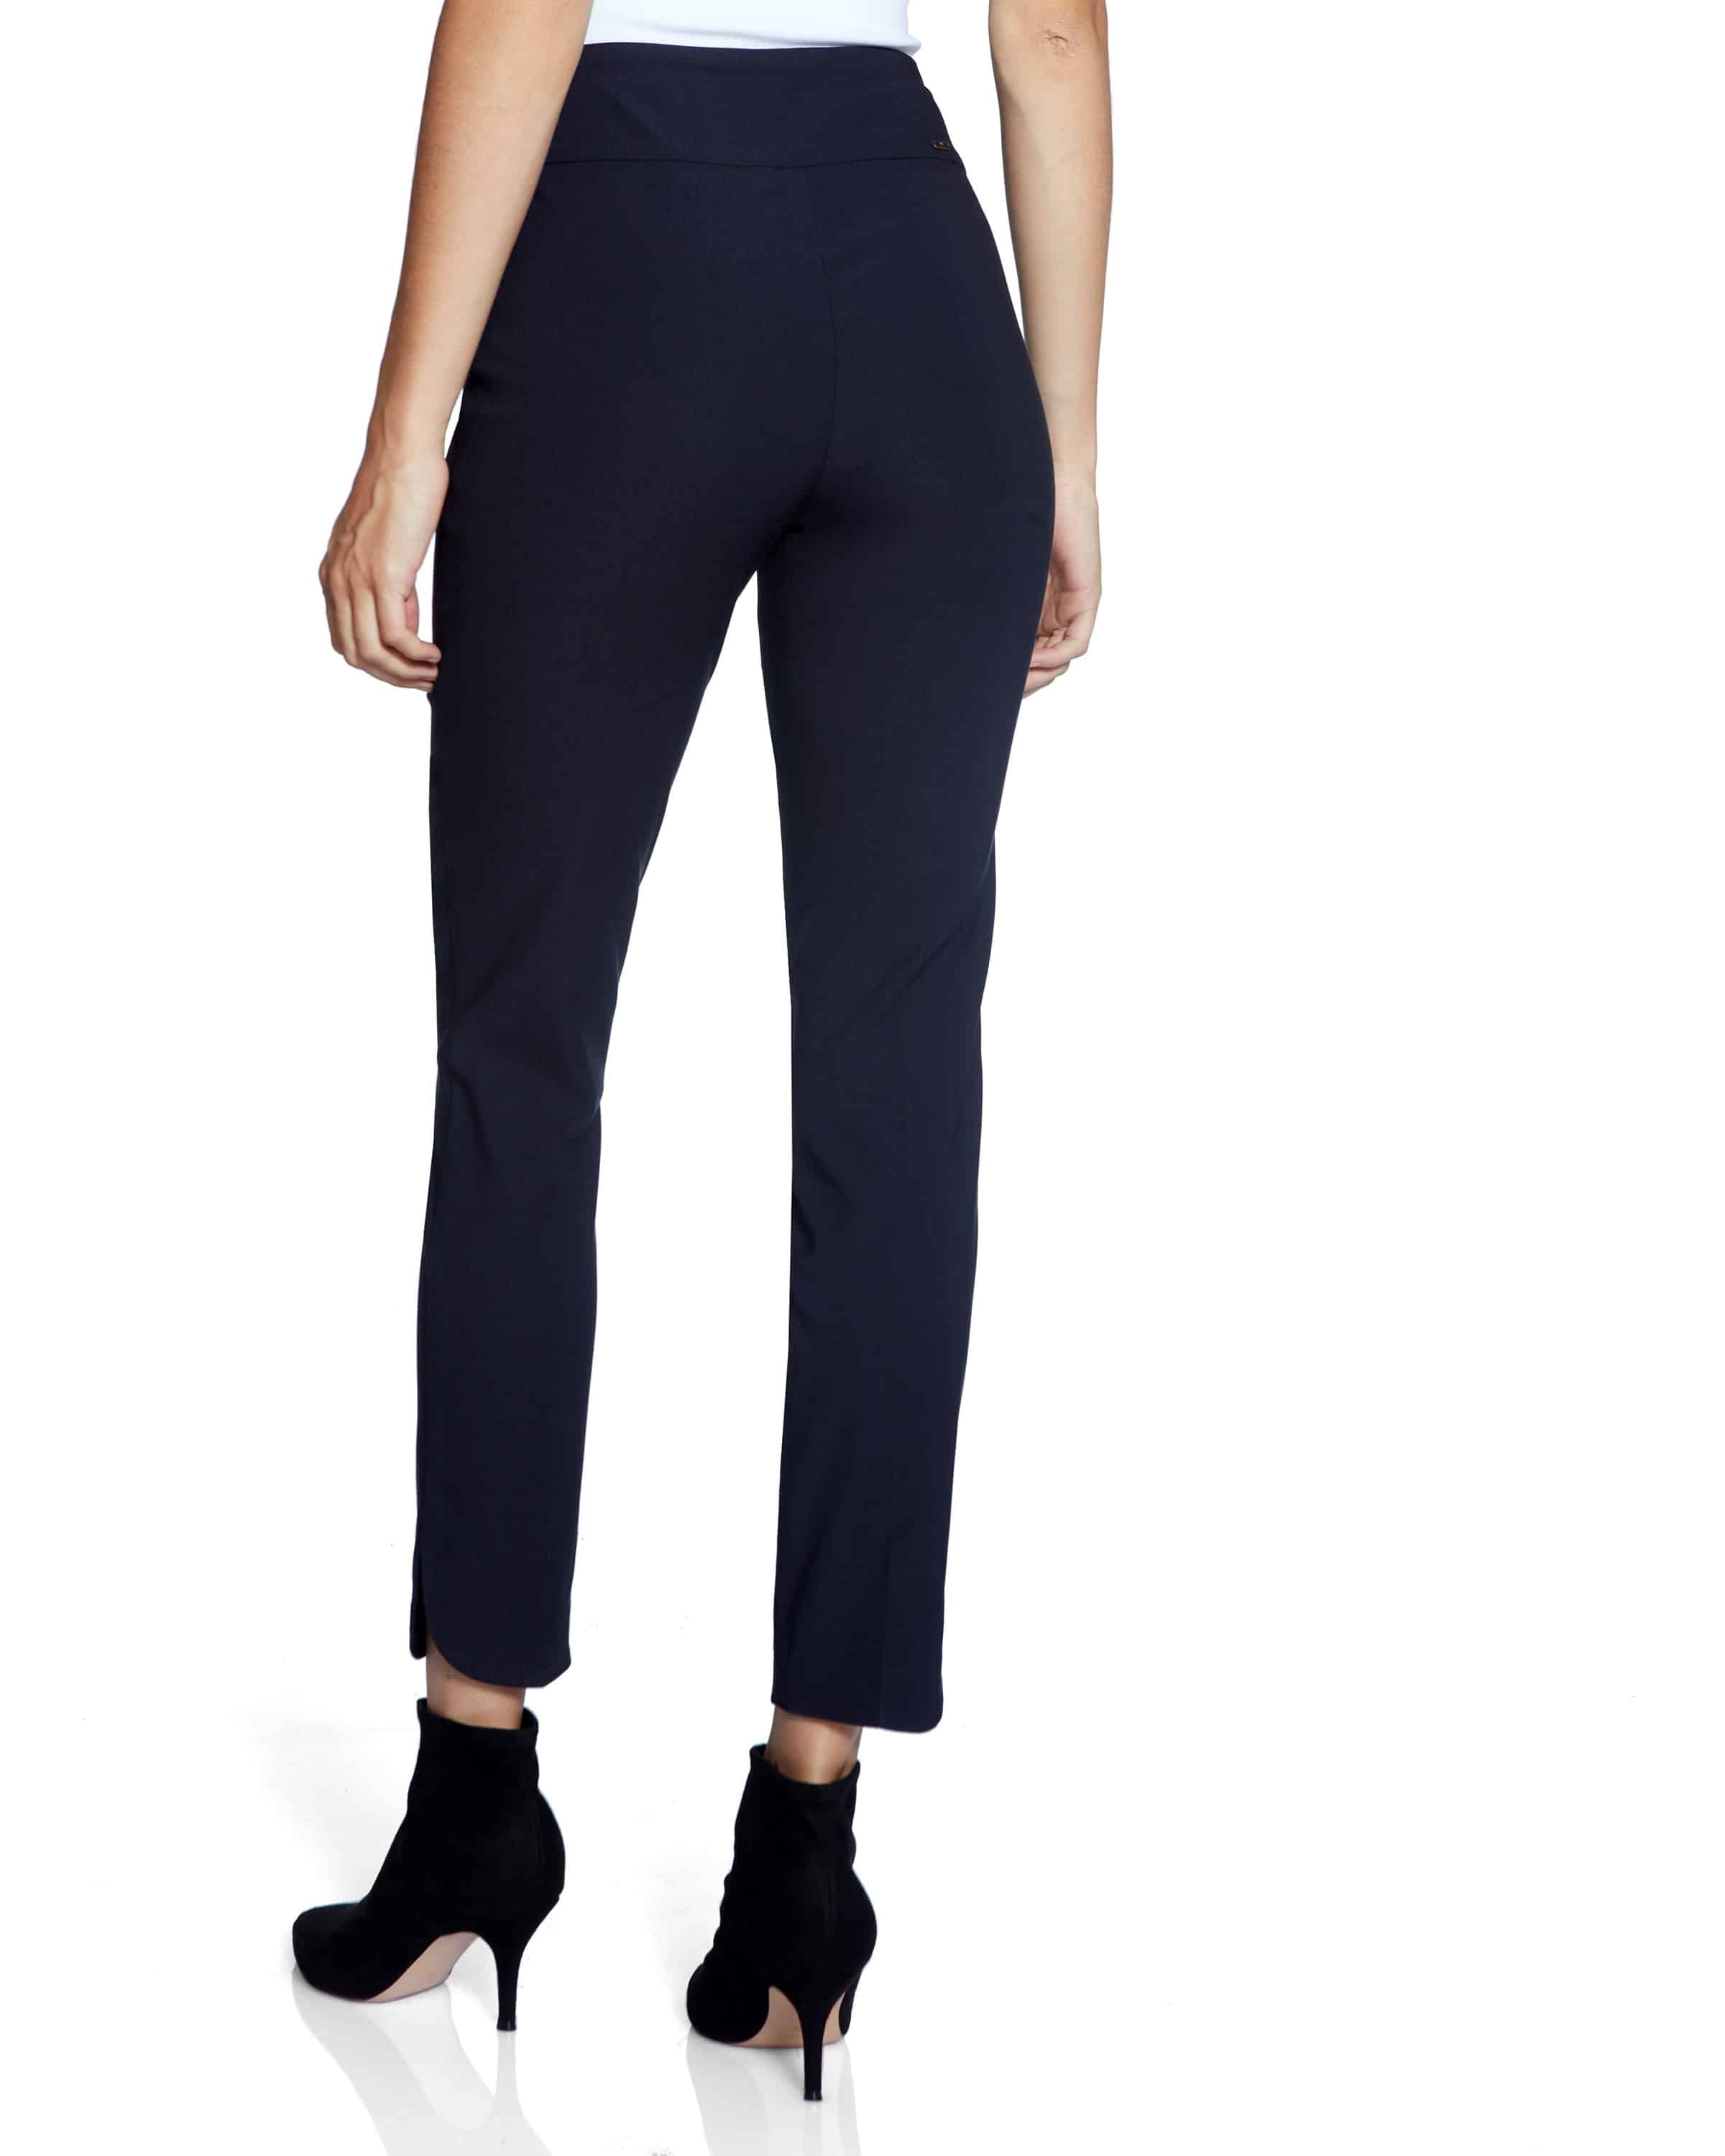 UP! Women's Pants Solid Slim Ankle Pant